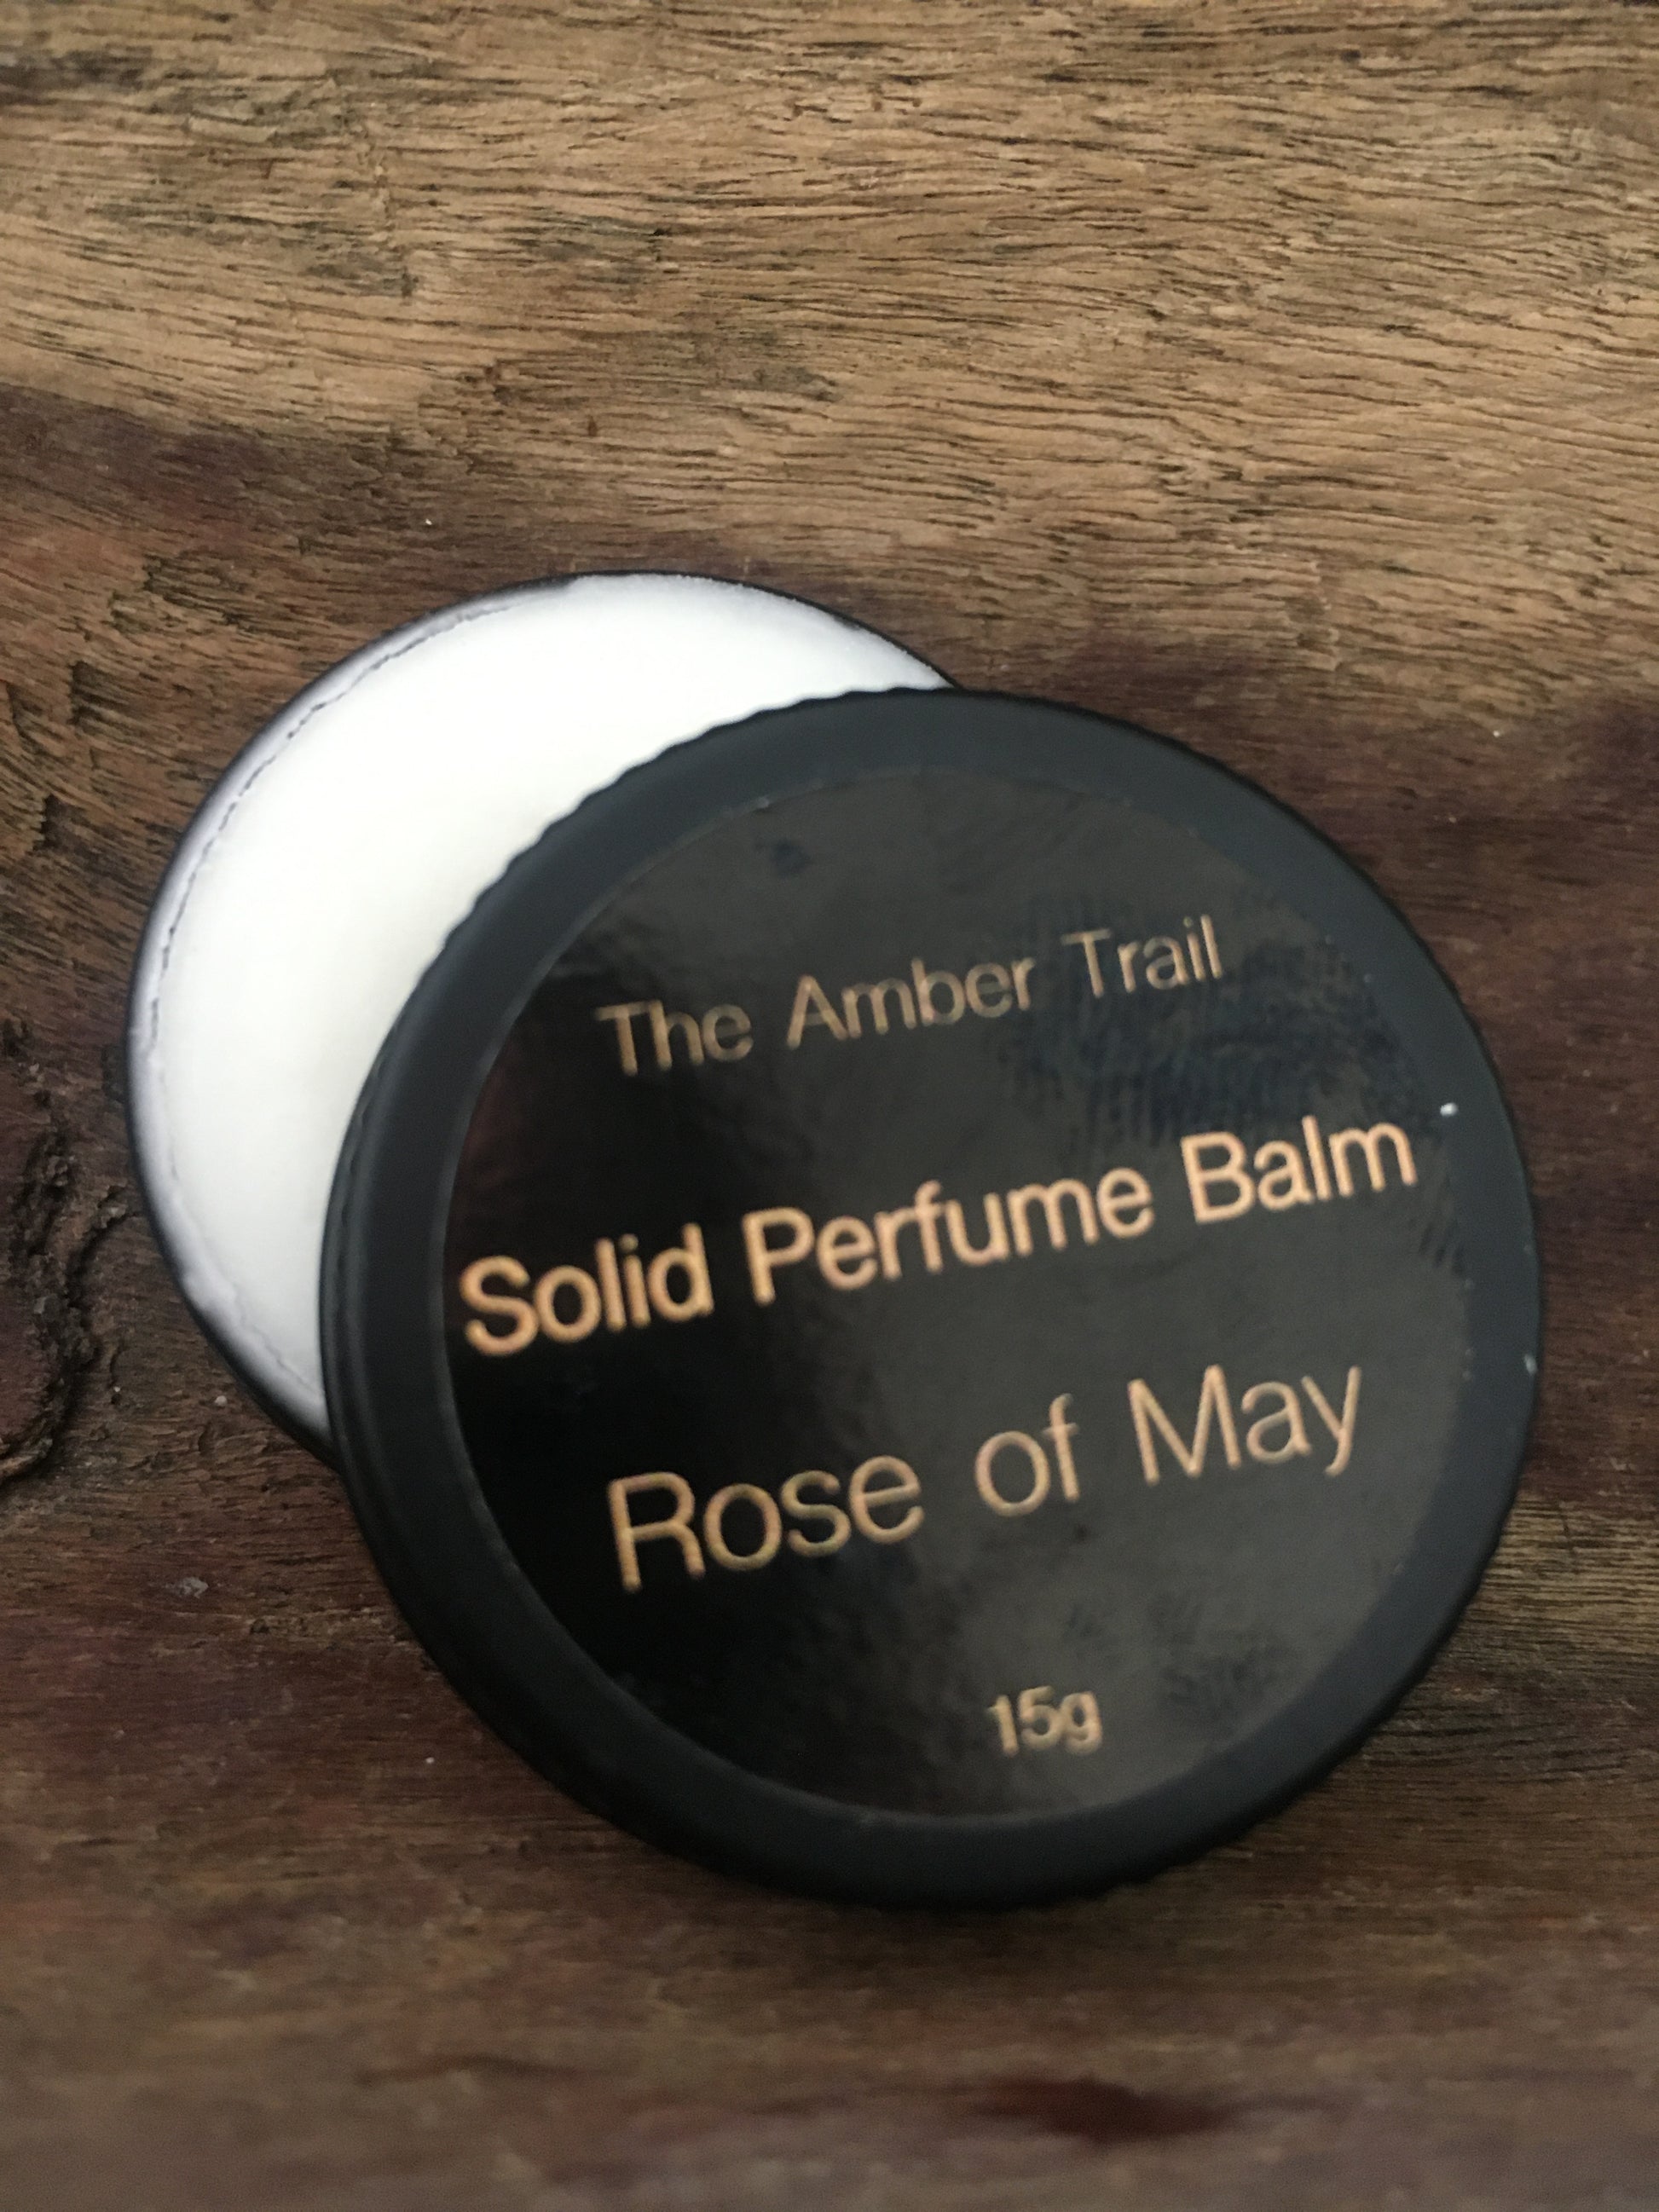 French Perfume Balms - Rose of May - The Amber Trail